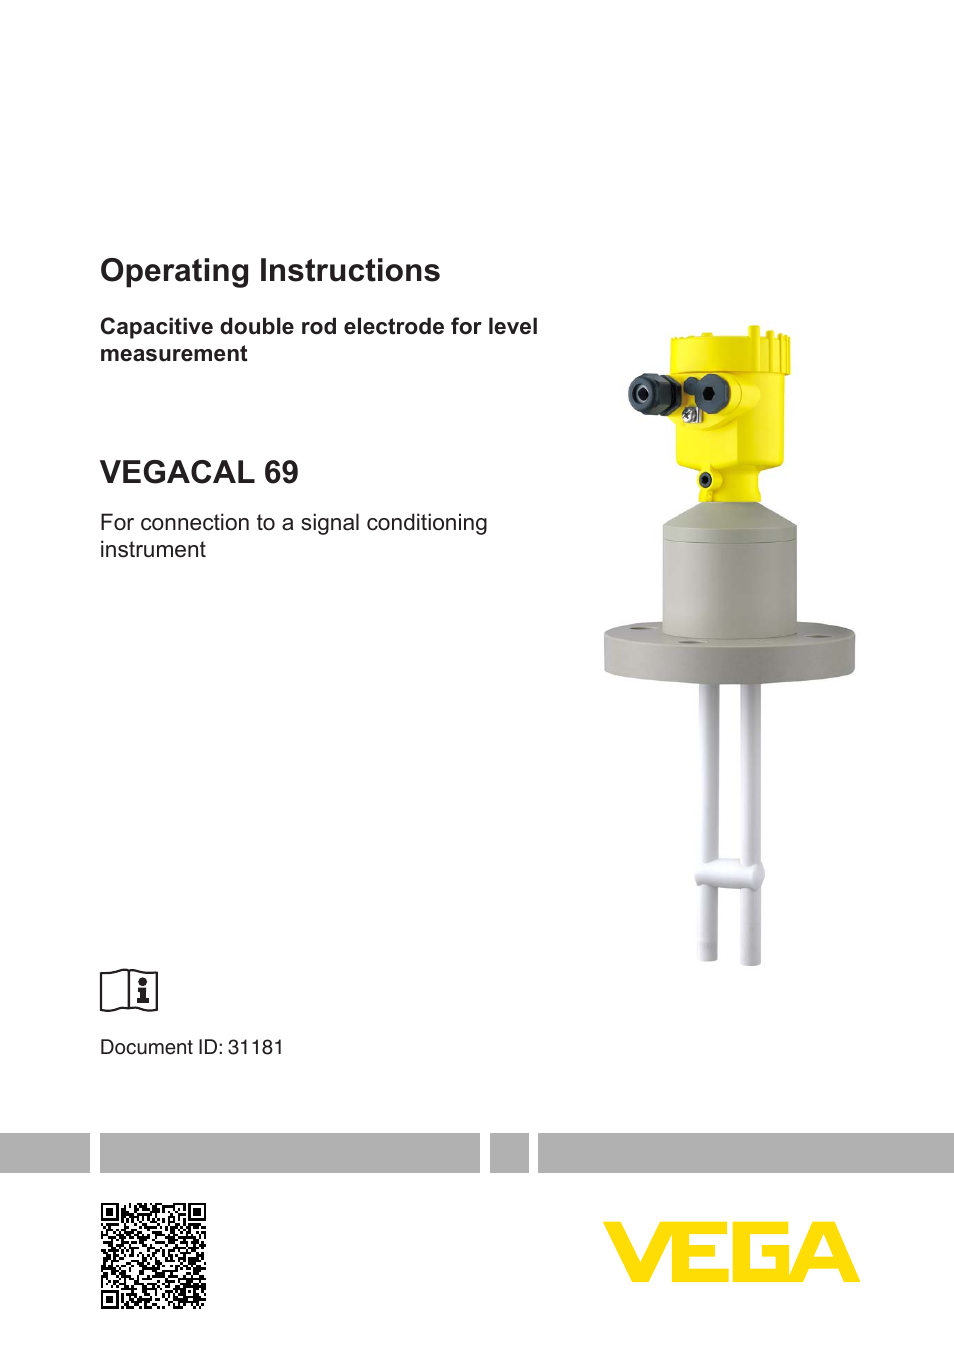 VEGACAL 69 For connection to a signal conditioning instrument